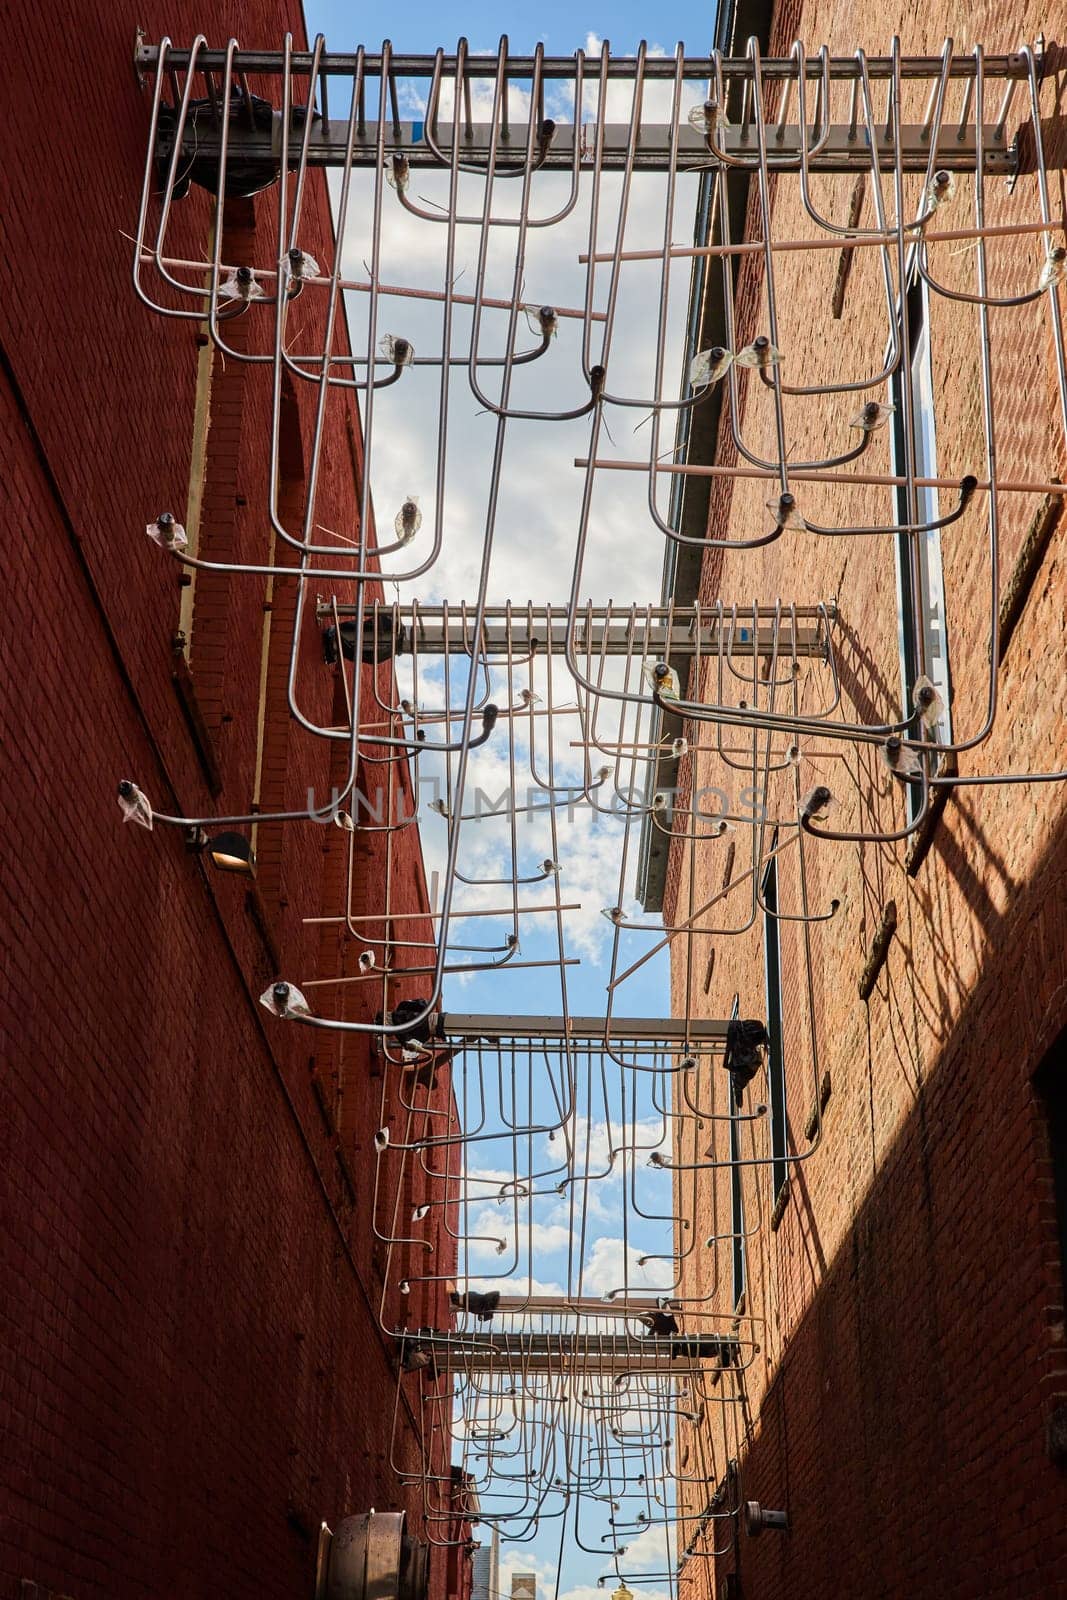 Urban Alleyway with Fire Escapes and Pigeons, Upward View by njproductions